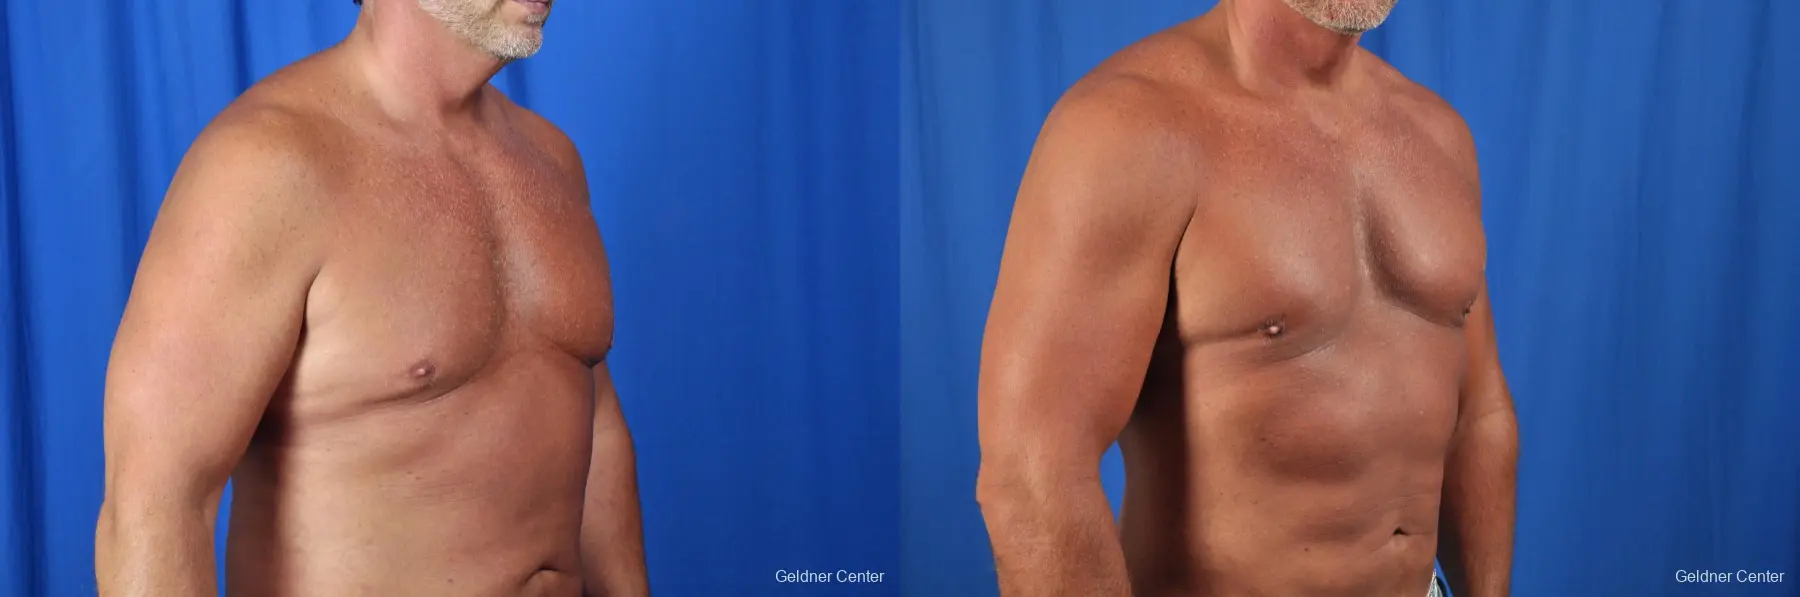 Gynecomastia: Patient 7 - Before and After 3